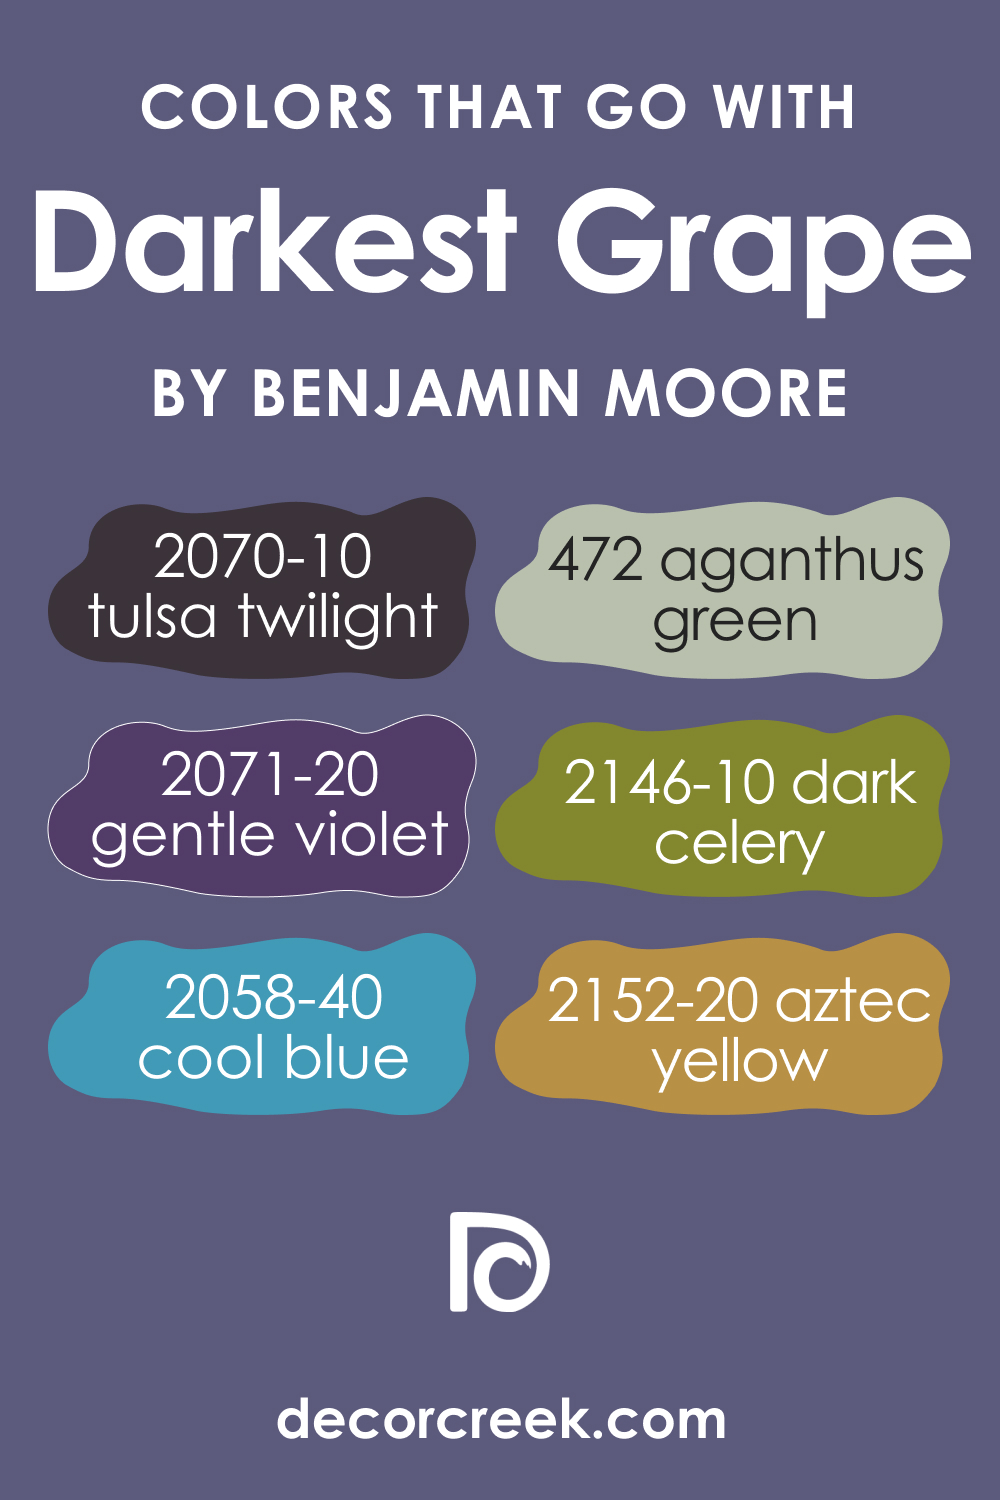 Colors That Go With Darkest Grape 2069-30